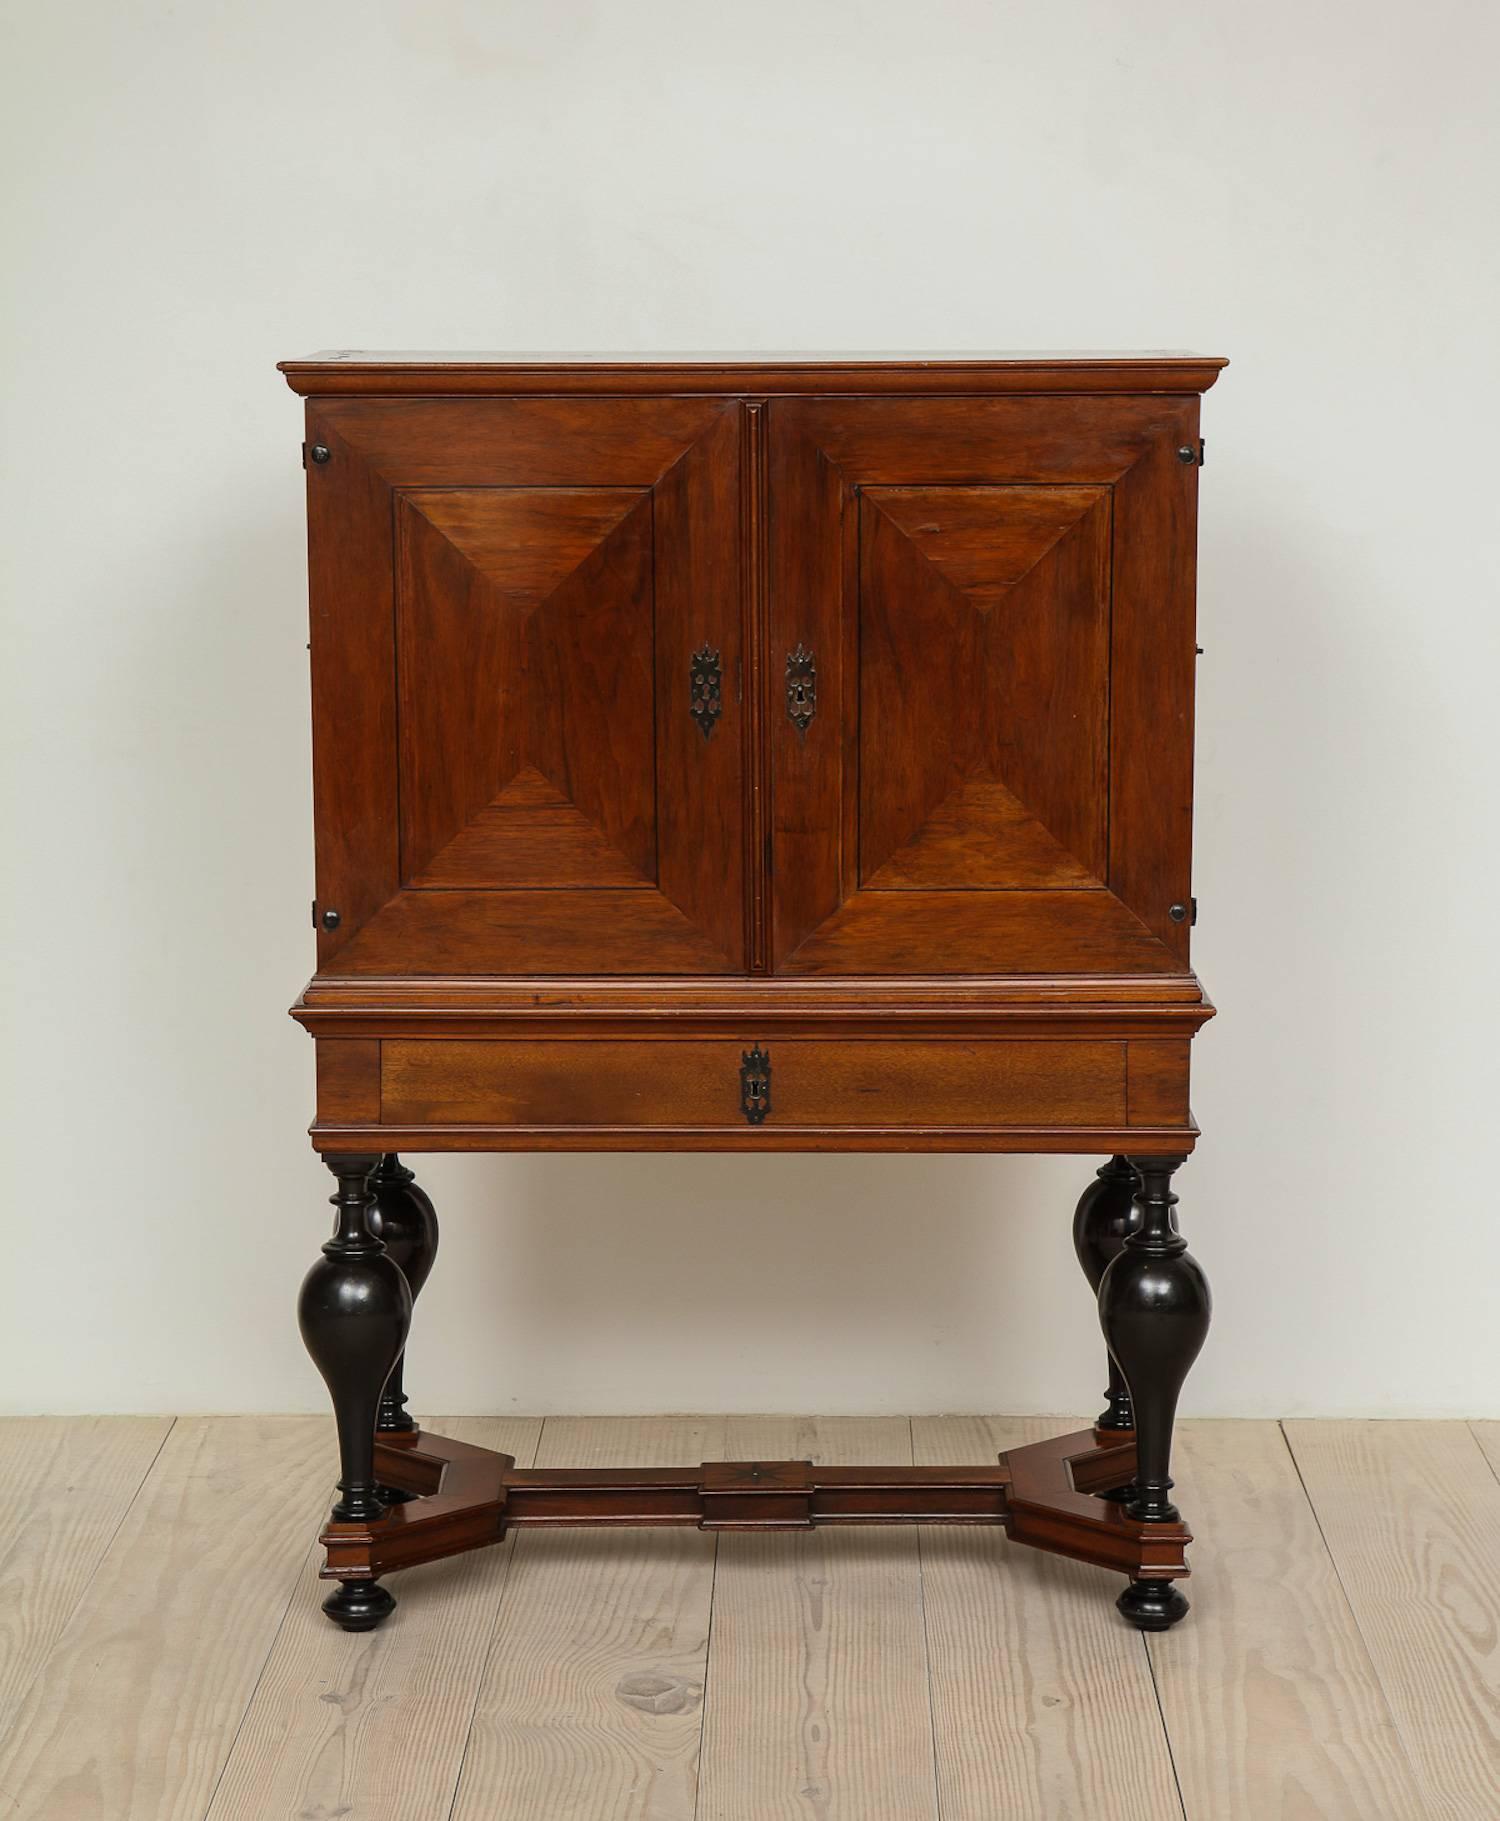 Hand-Crafted Baroque Mahogany Swedish Cabinet on Stand, Stockholm, Sweden, Circa 1740-1770